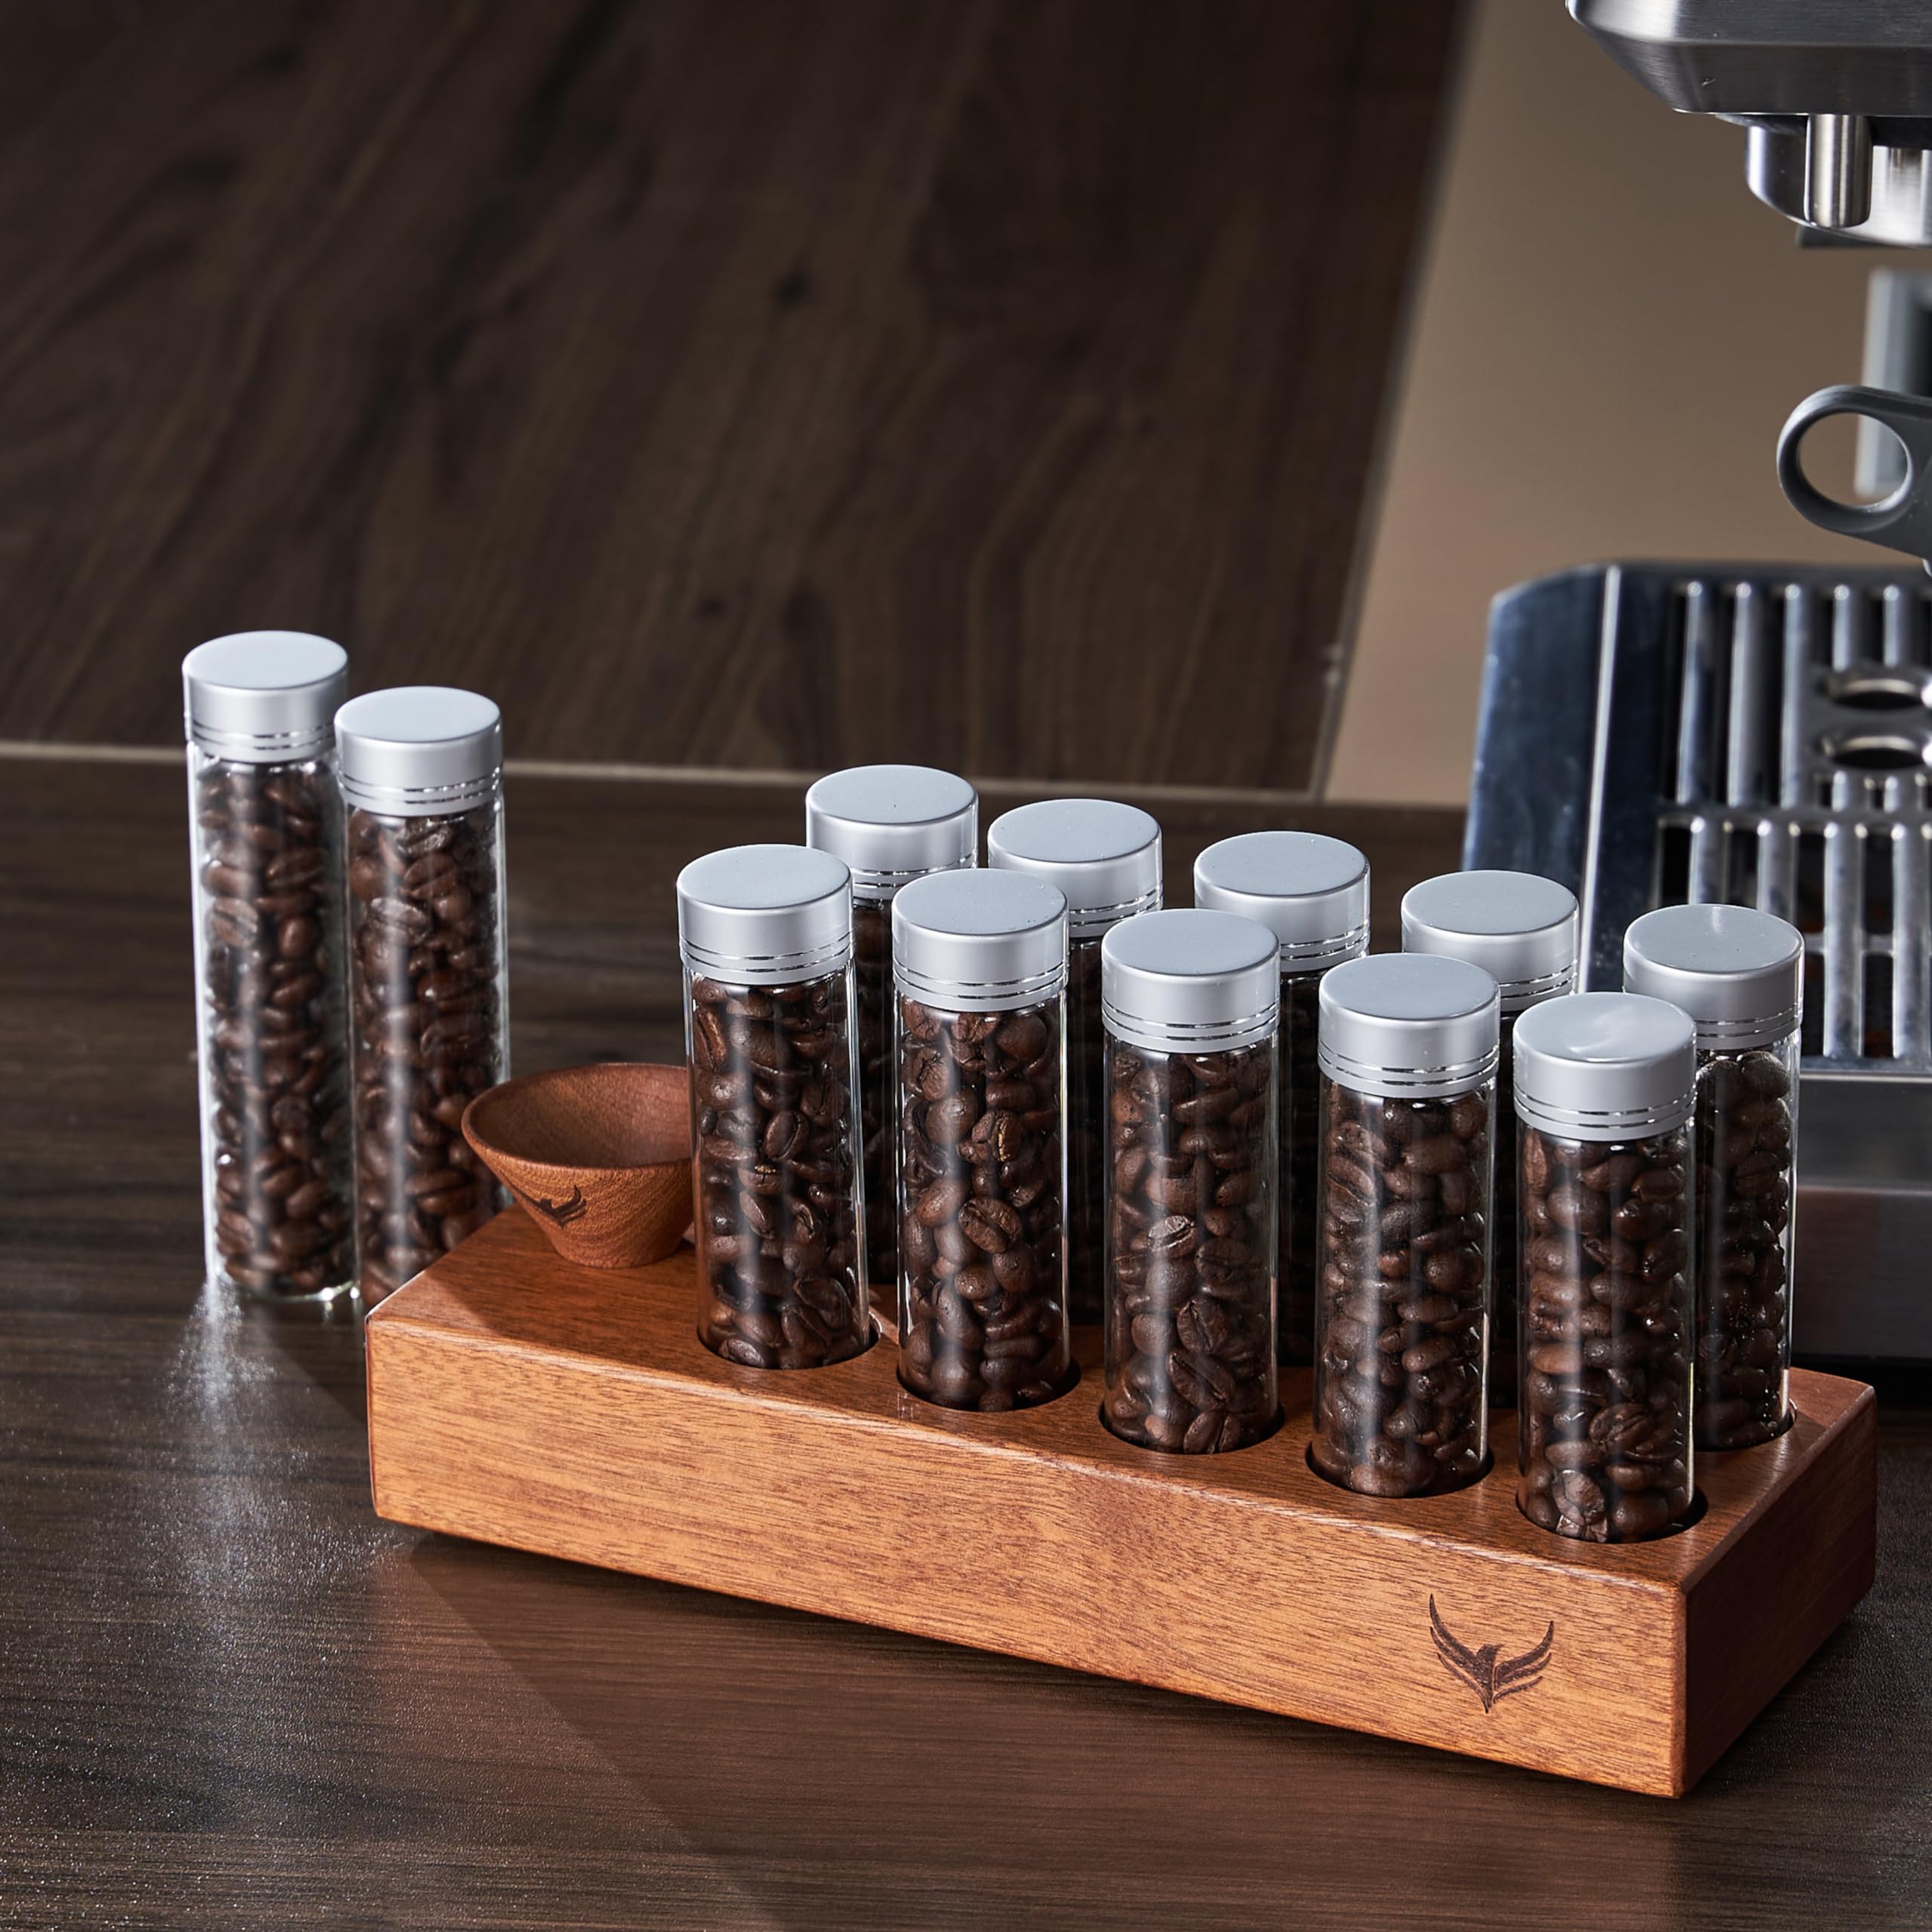 Single Dose Coffee Bean Storage Tubes KNODOS Coffee Bean Cellar 10 Pcs Dosing Glass Vials With Lids (2 Oz) Wooden Display Stand And Funnel